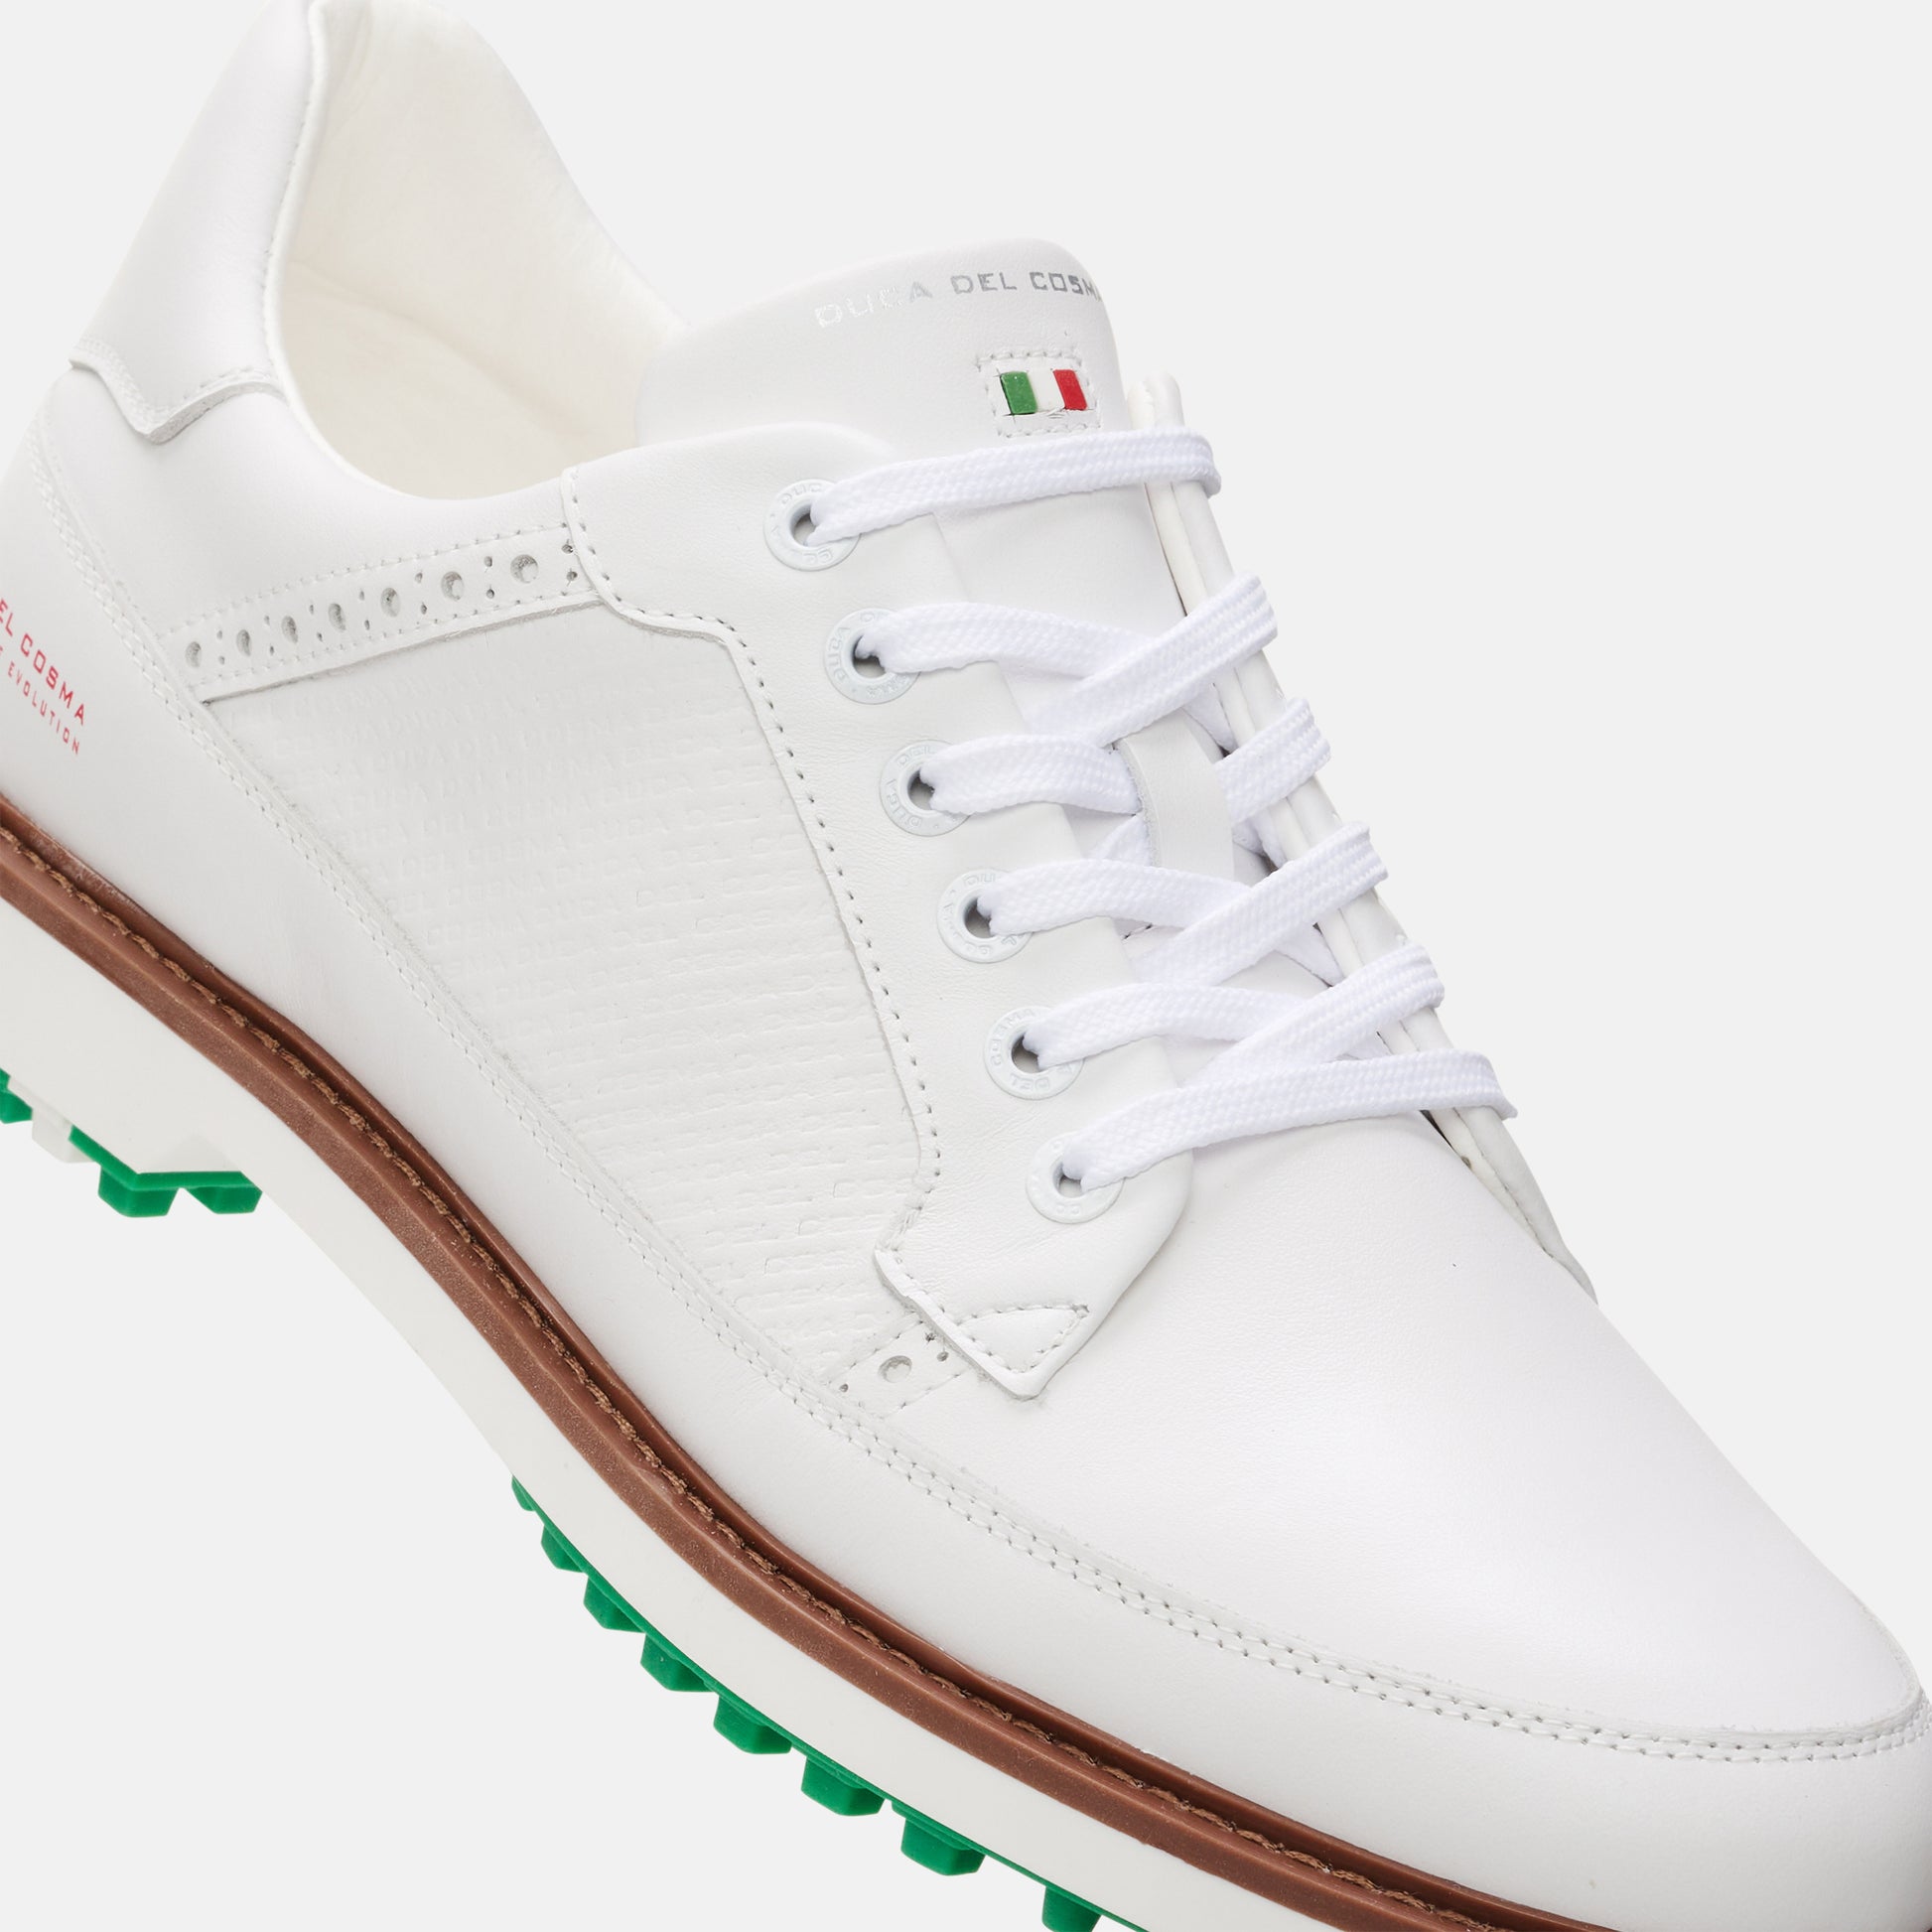 Lightweight Golf Shoes, White Golf Shoes, Waterproof Golf Shoes, Spikeless Golf Shoes, Duca del Cosma Men's Golf Shoes, Classic golf shoes.